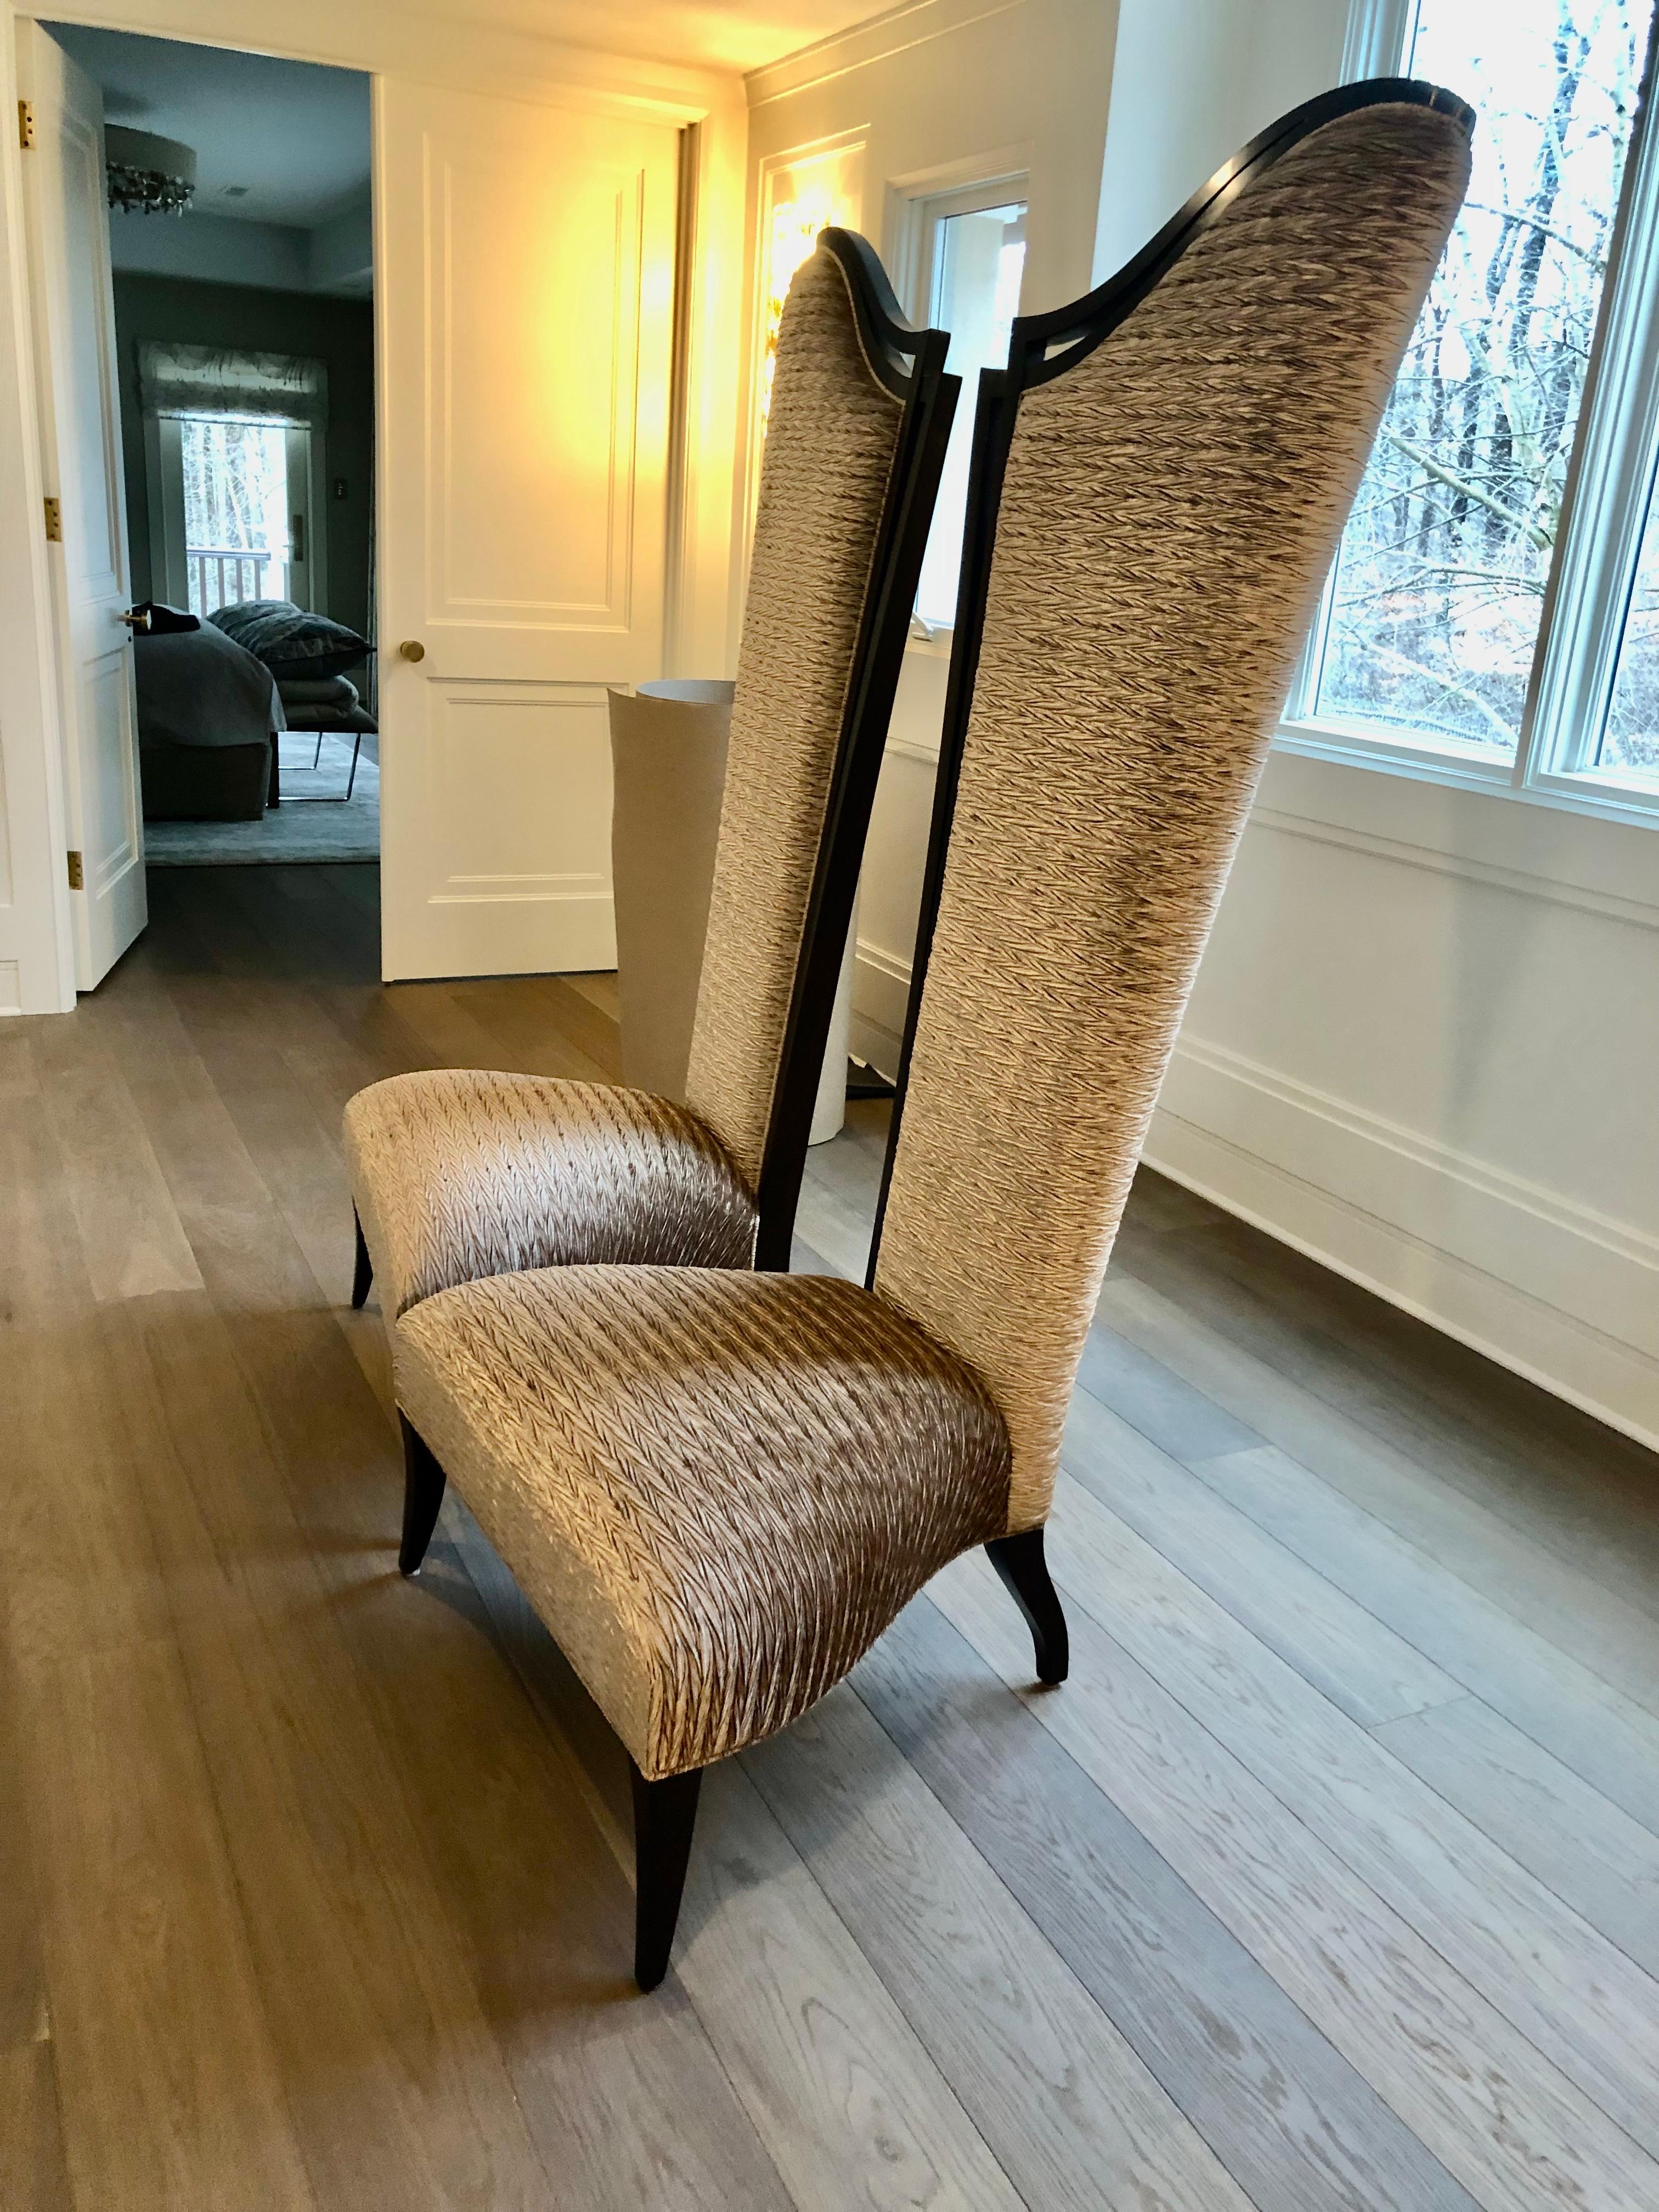 Superbly stylized pair of Versense Droite Christopher Guy chairs that will steal the show wherever placed in your home having low wide seats and whimsical extremely high backs. Add a touch of grandeur with these matched left and right asymmetrical